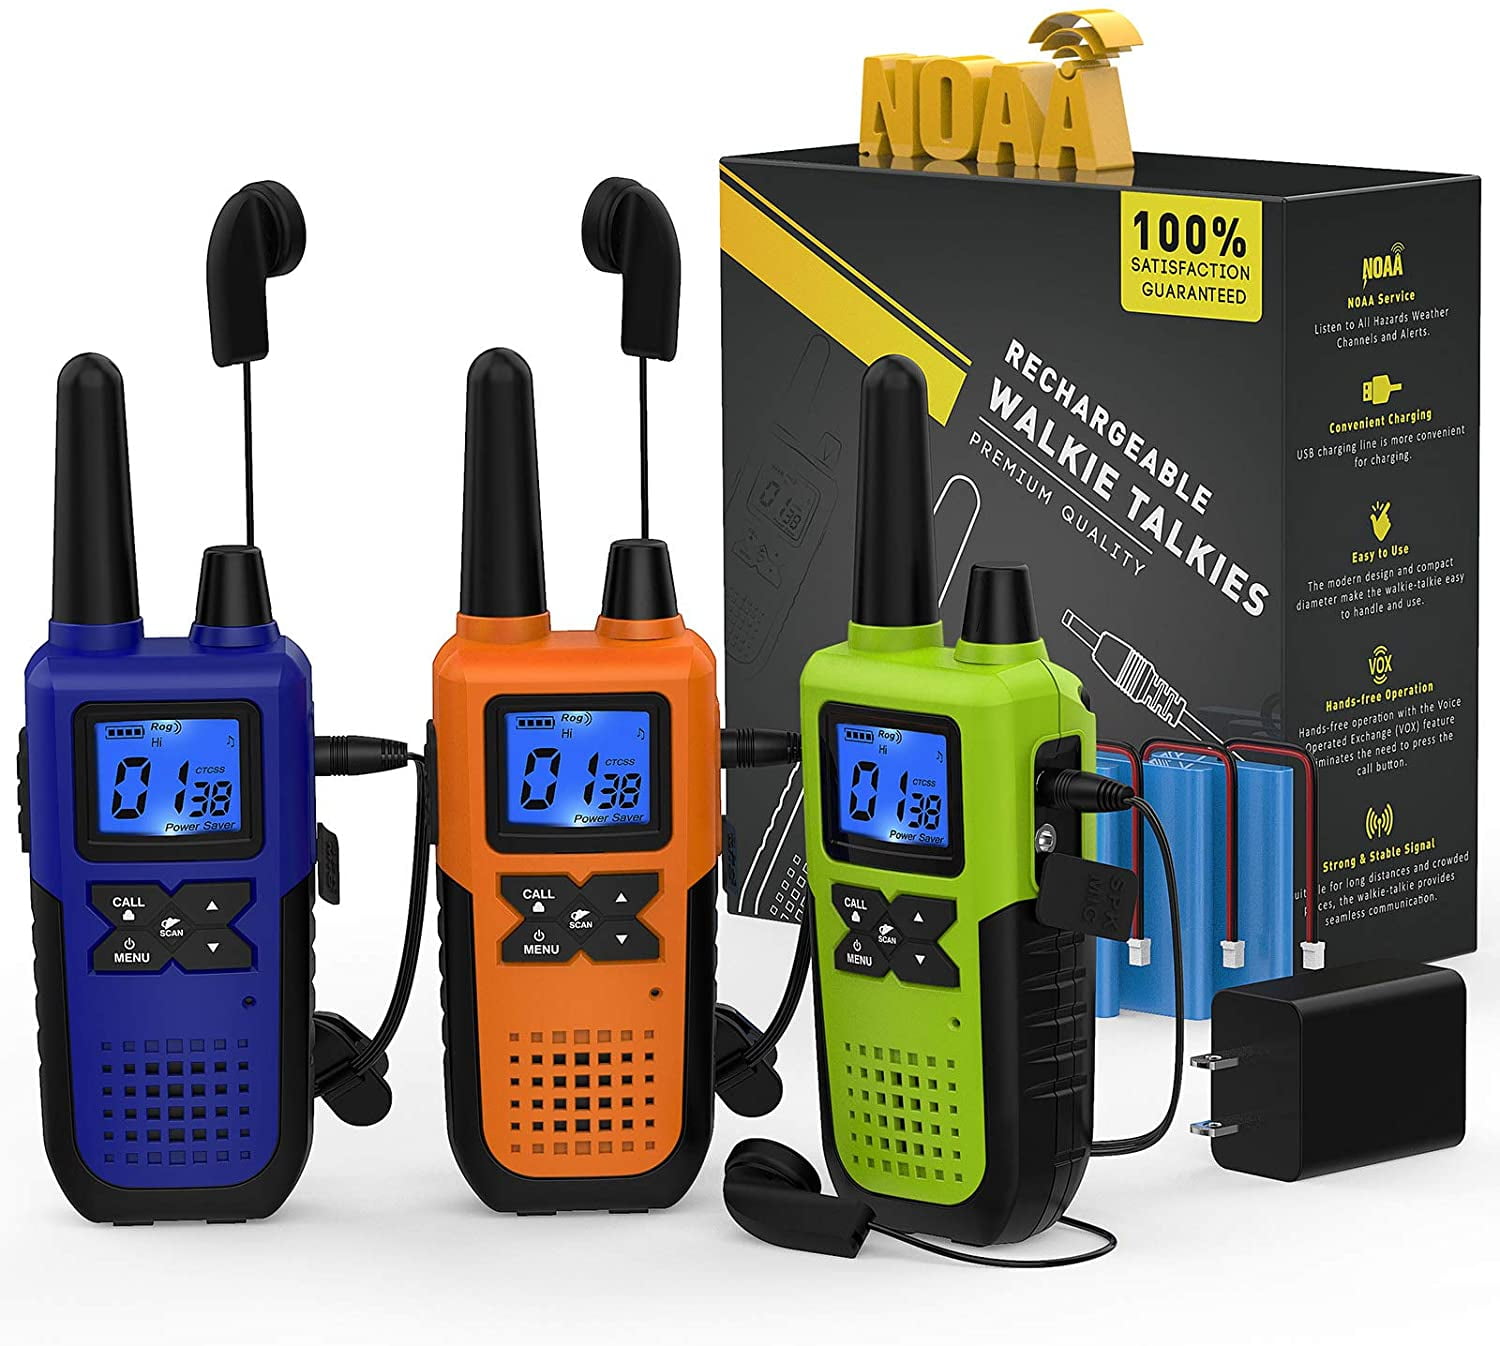 VOX Scan LED Lamplight for Outdoor Activities Yellow Walkie Talkies 2 Pack NOAA & Weather Alerts Up to 32 Miles Long Range USB Rechargeable Walkie Talkies w/ 2662 Channels COTRE Two Way Radios